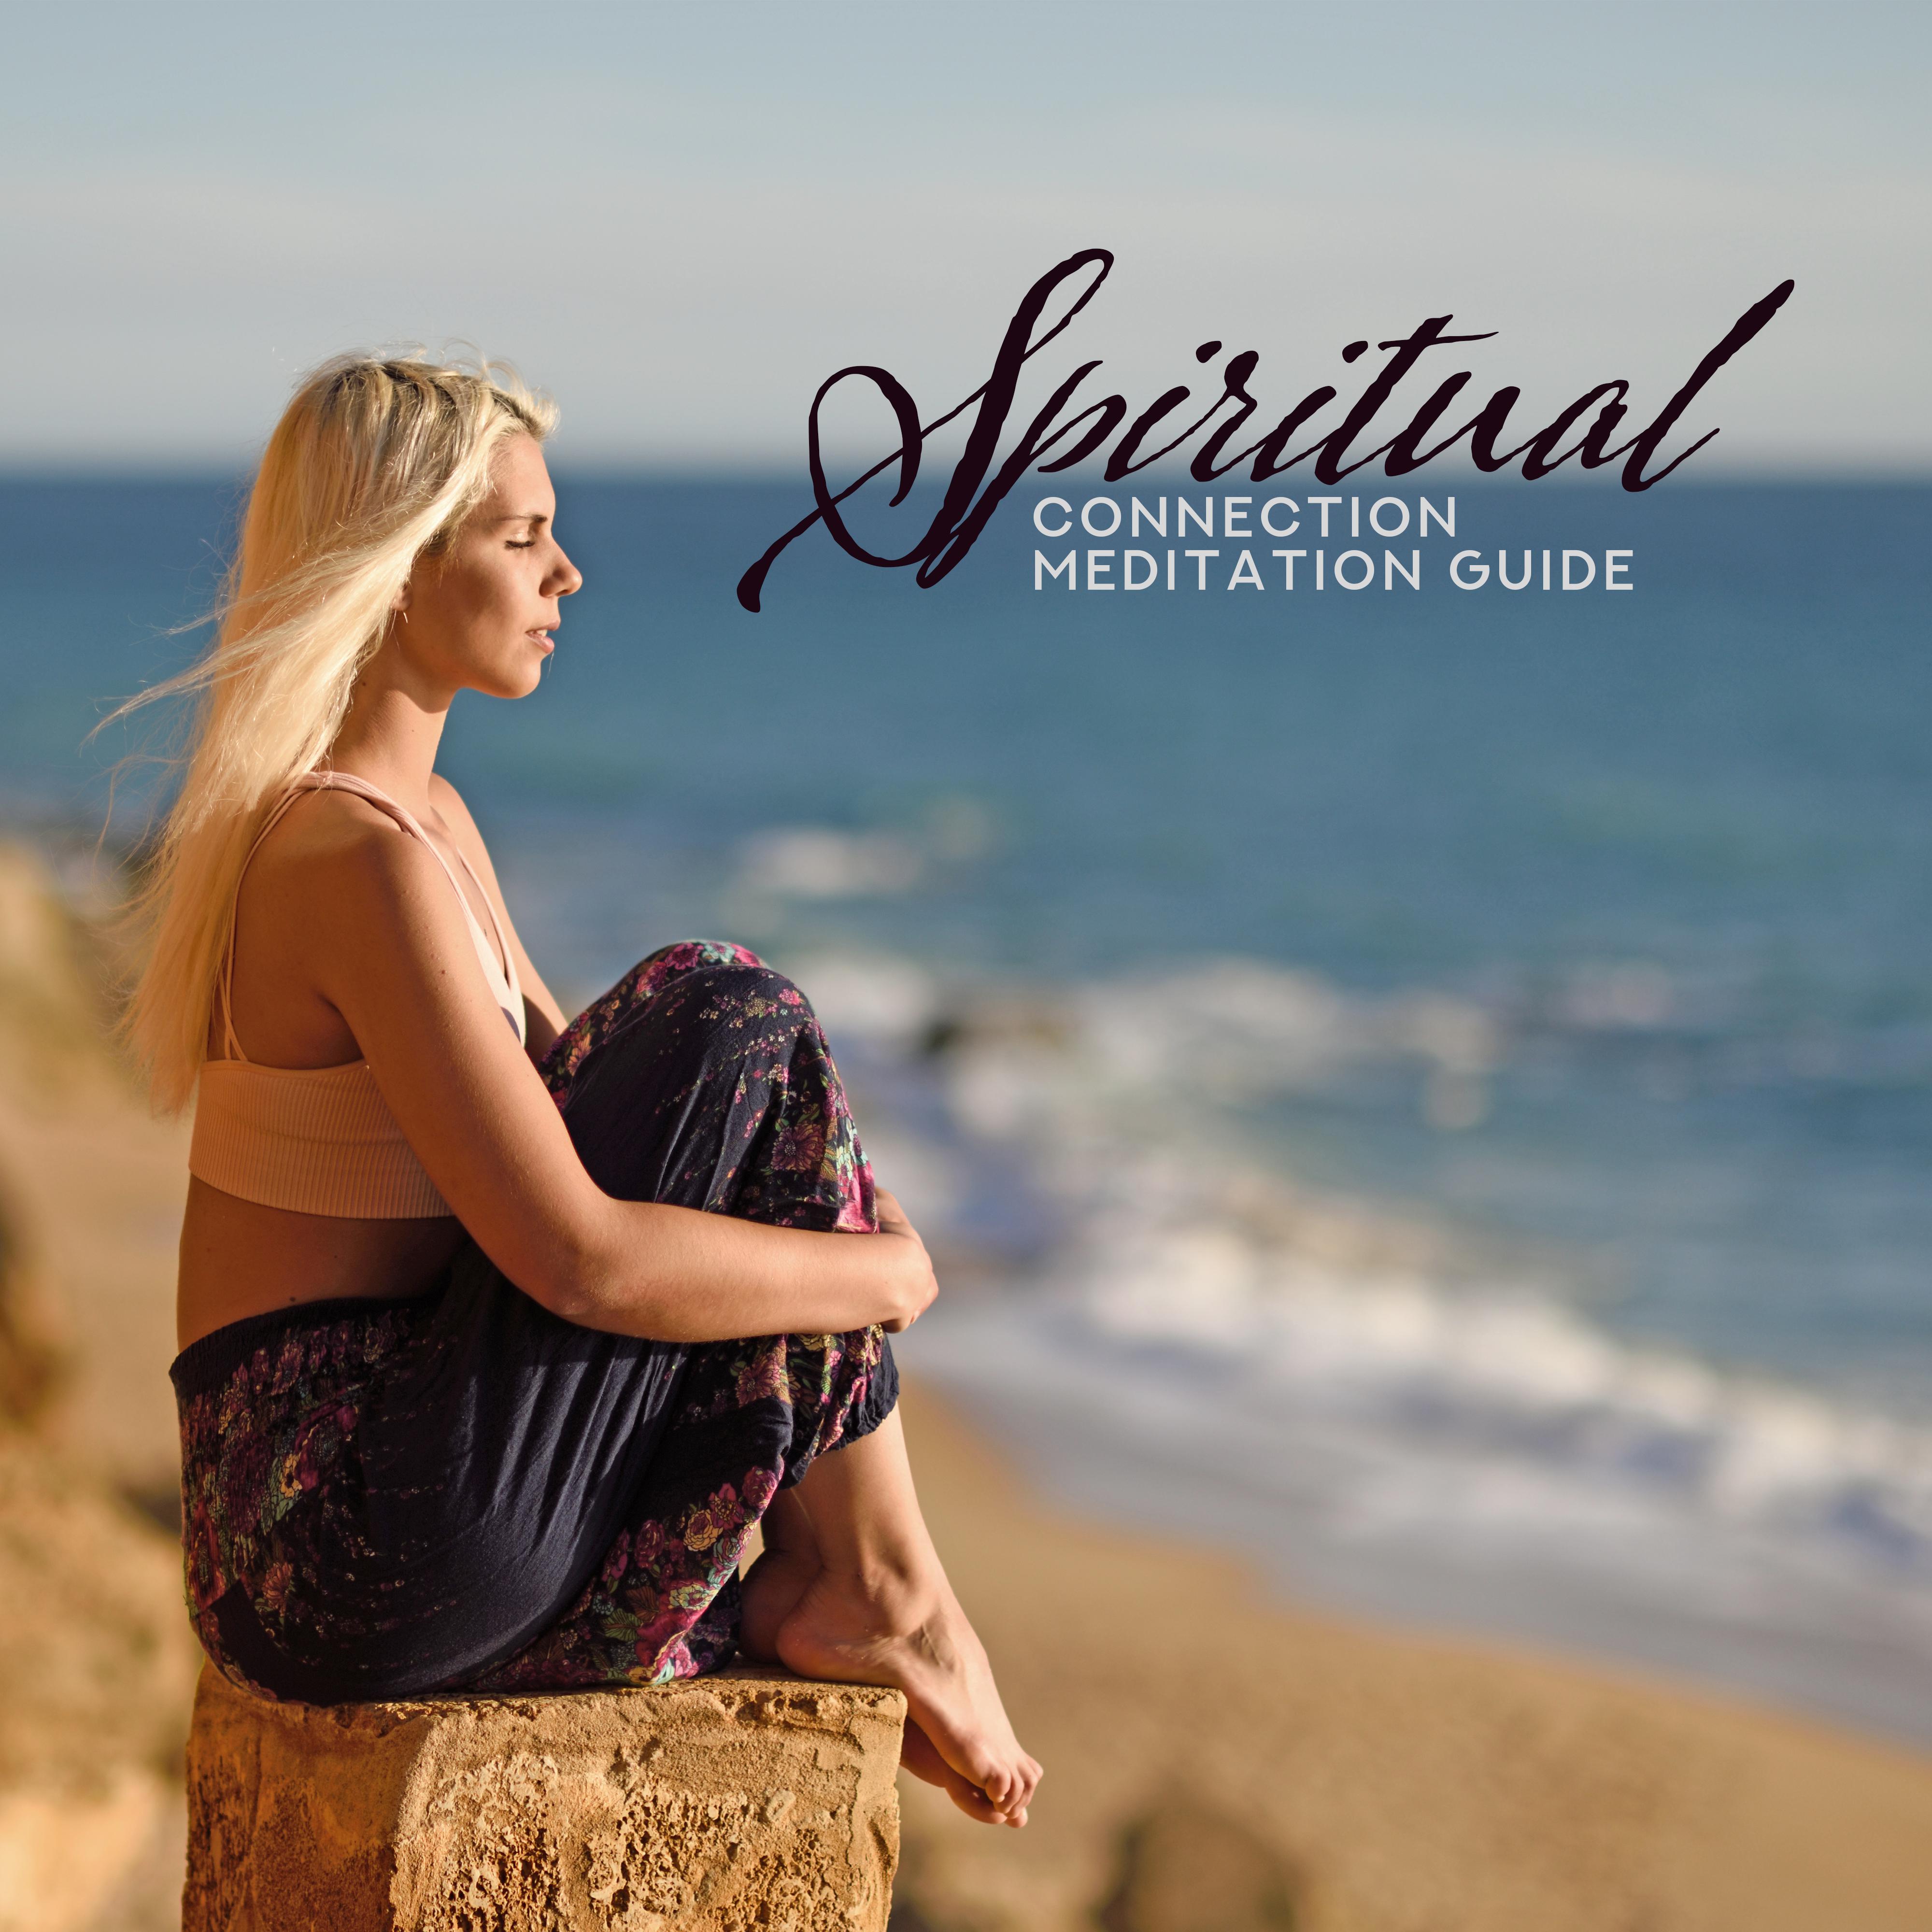 Spiritual Connection Meditation Guide – 15 New Age Ambient 2019 Songs for Deep Connection Between Body & Soul, Zen Healing, Opening Chakras & Third Eye